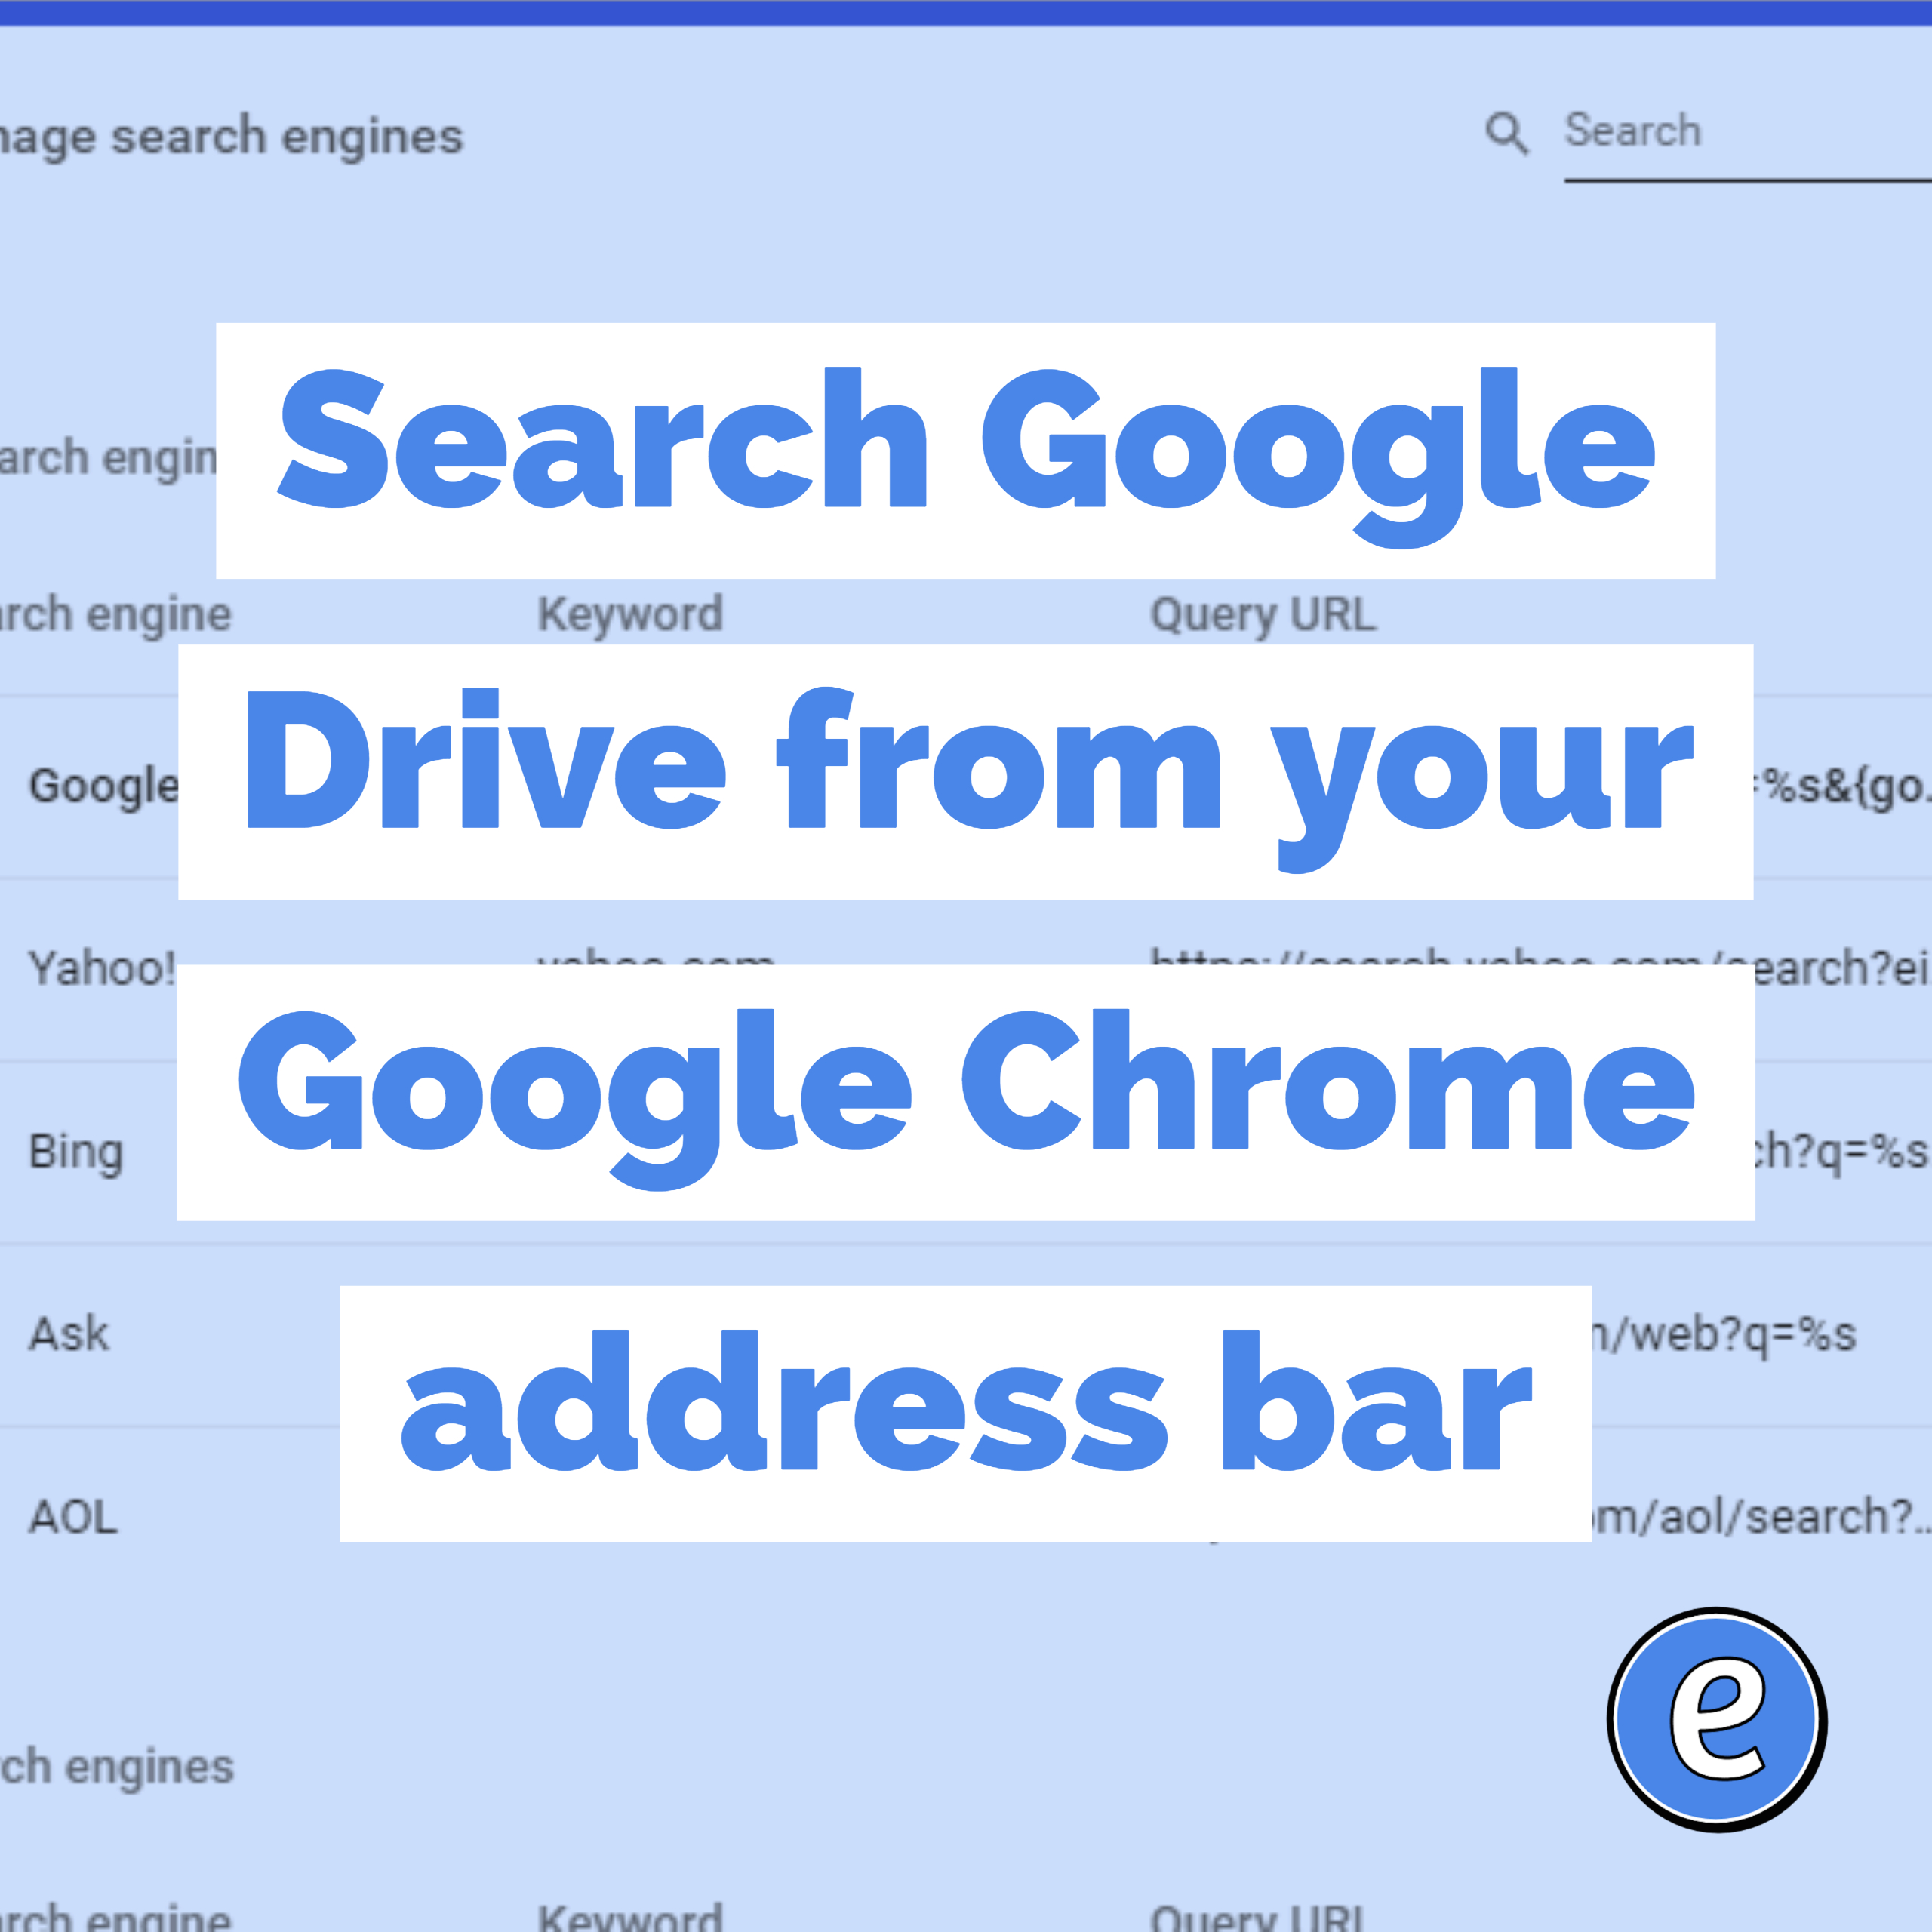 Search Google Drive from your Google Chrome address bar